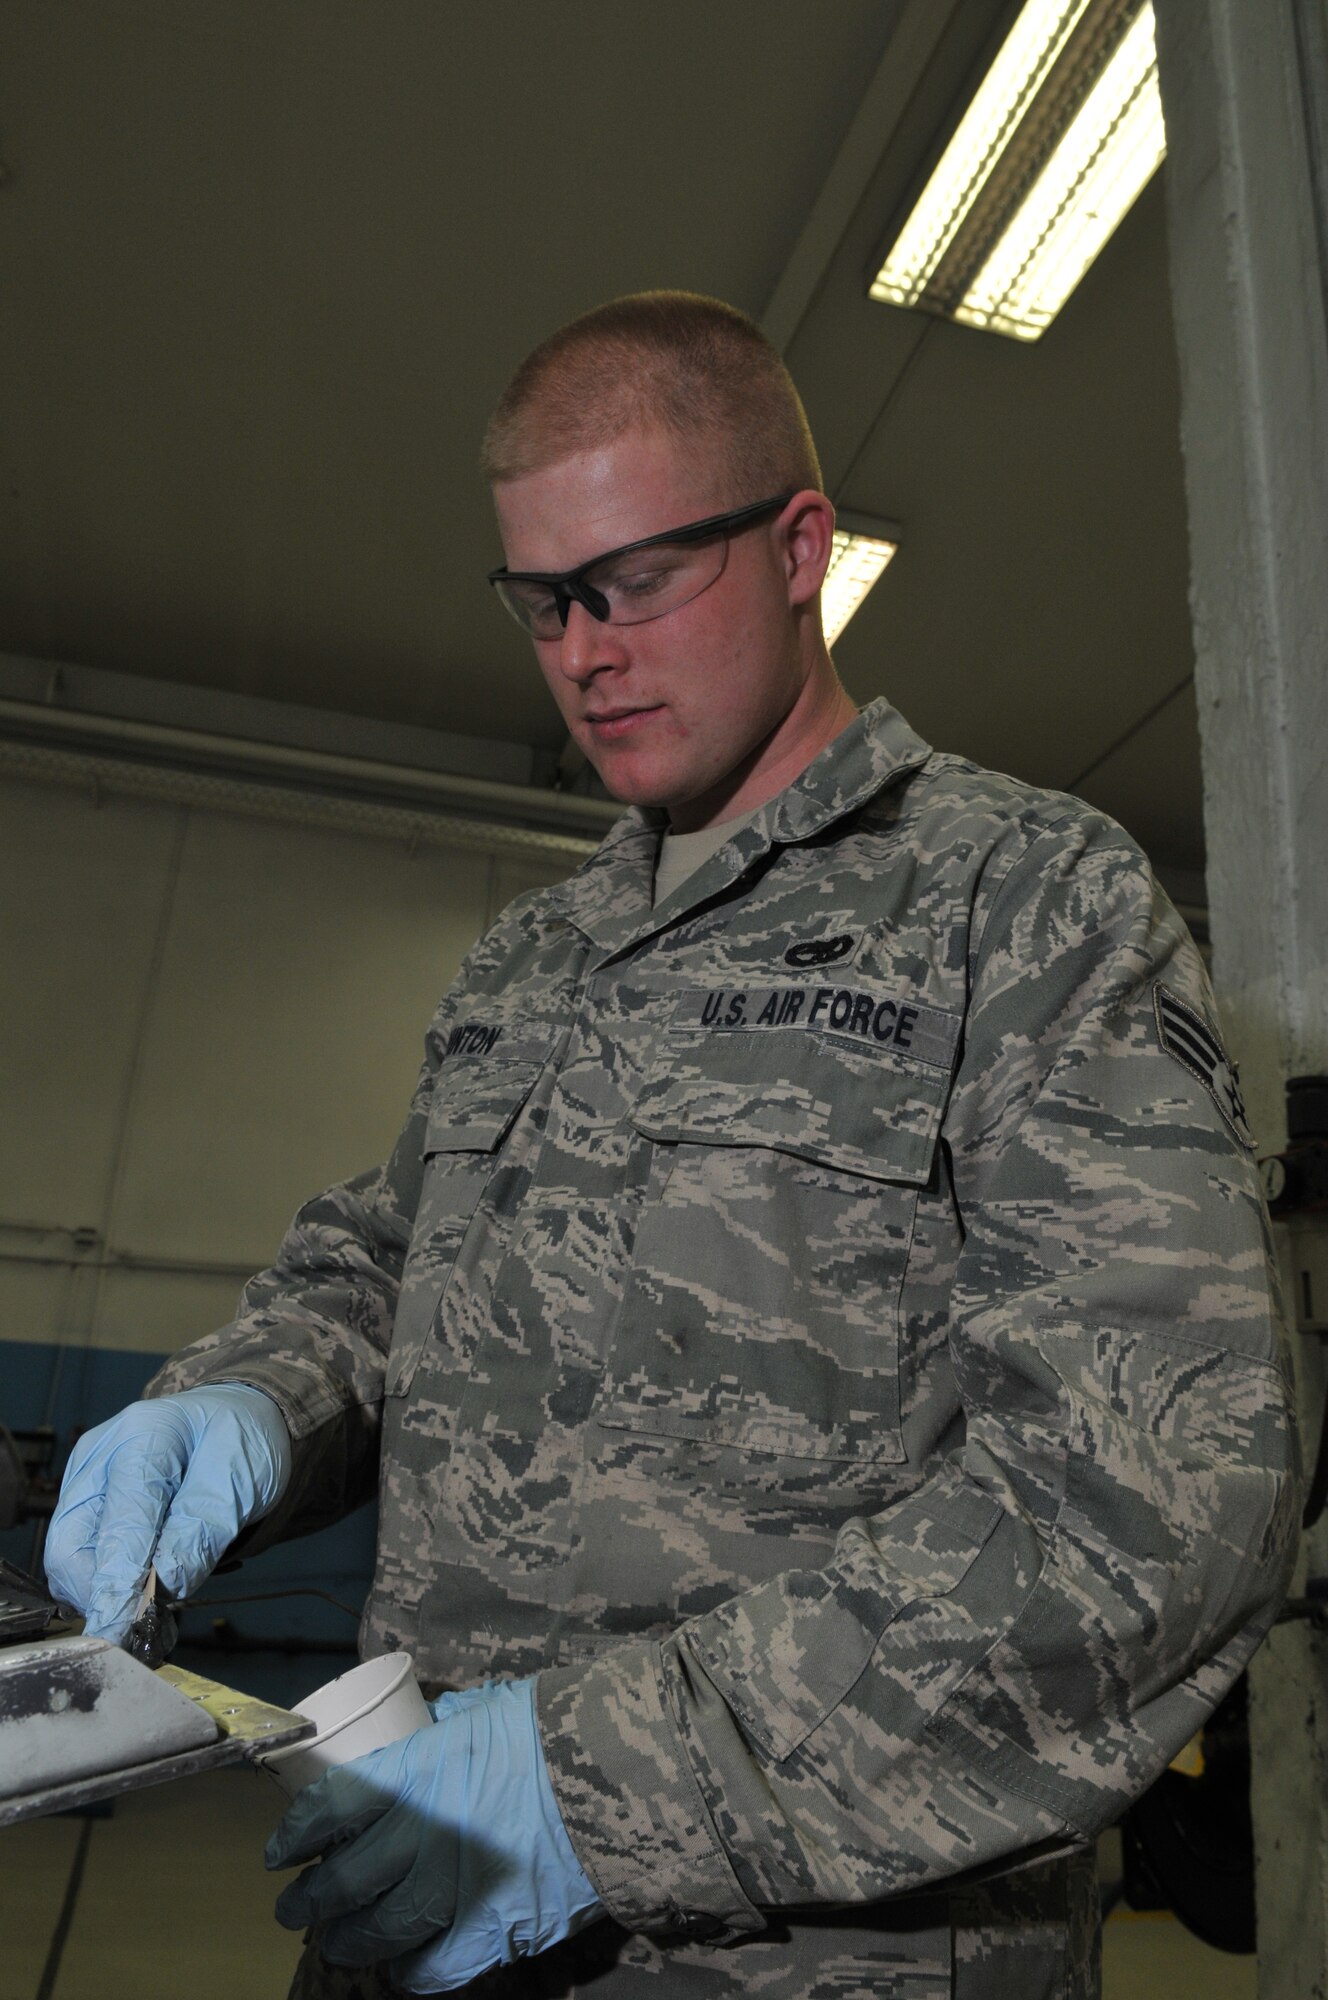 SPANGDAHLEM AIR BASE, Germany -- Senior Airman Ray Vinton, 52nd Equipment Maintenance Squadron, applies sealant compound to a gun access door for an A-10 Thunderbolt II Jan. 21 in the aircraft structural maintenance shop. The sealant compound keeps water from getting between the metal and corroding layers of an aircraft's structure. (U.S. Air Force photo/Airman 1st Class Nick Wilson)